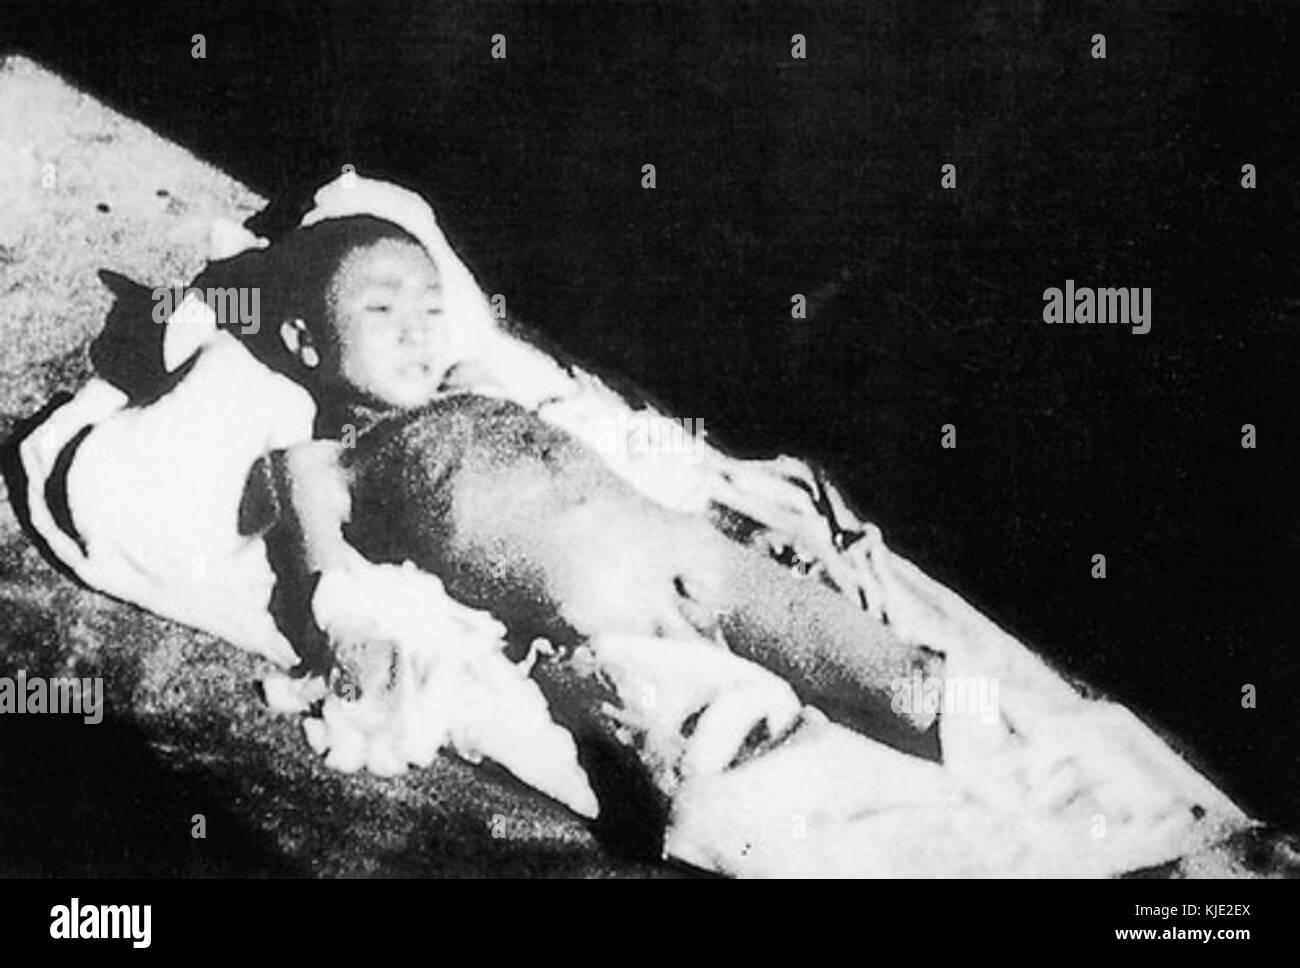 A seven year old child bayoneted dead by Japanese in Nanjing Massacre Stock Photo